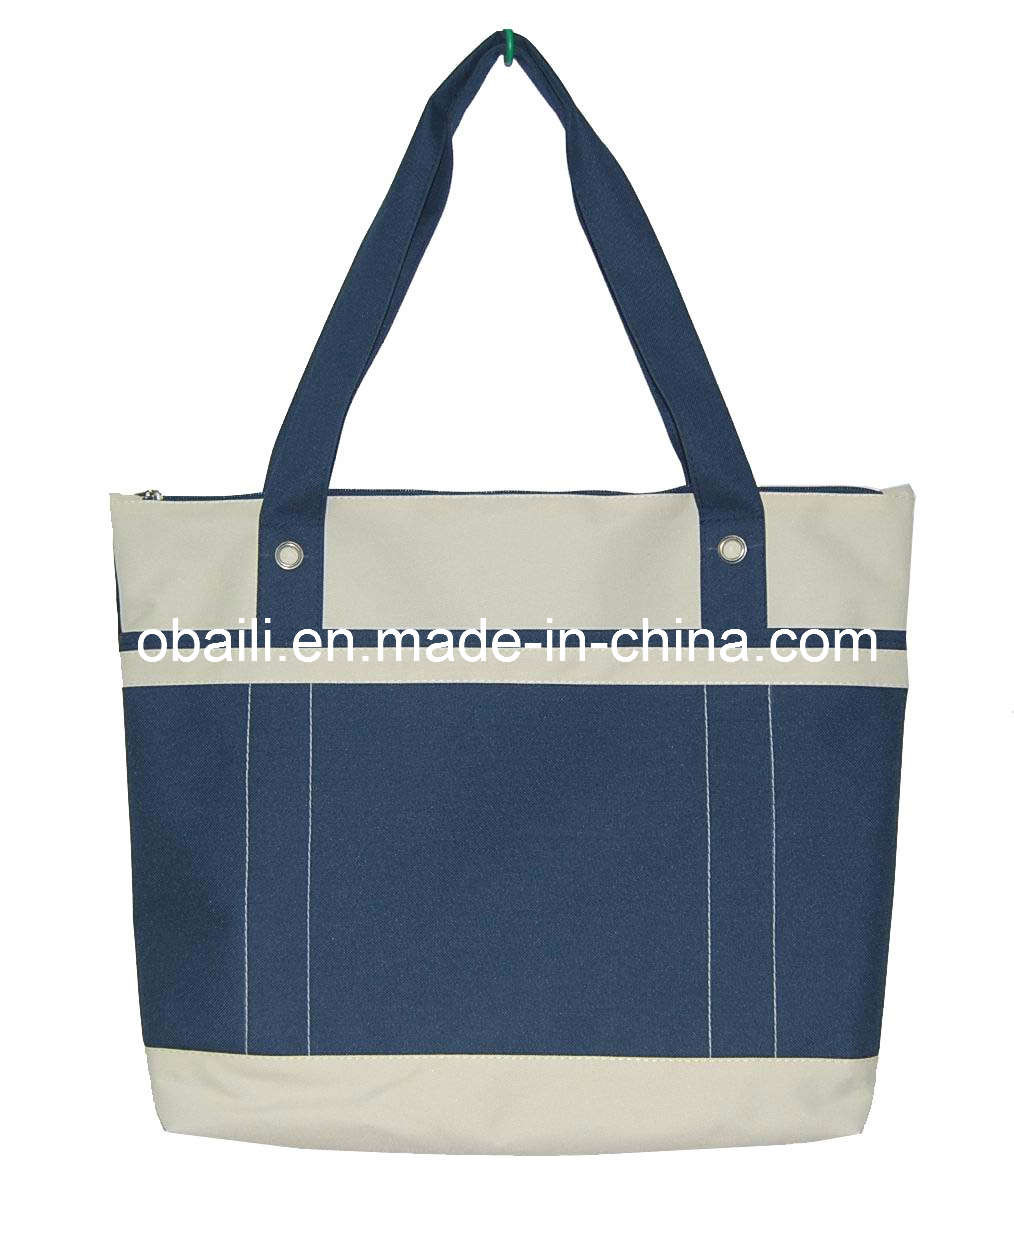  Hot Selling Printing Canvas tote Bag Stylish Cotton Shopping Bag Promotional fashion Women Manufactures